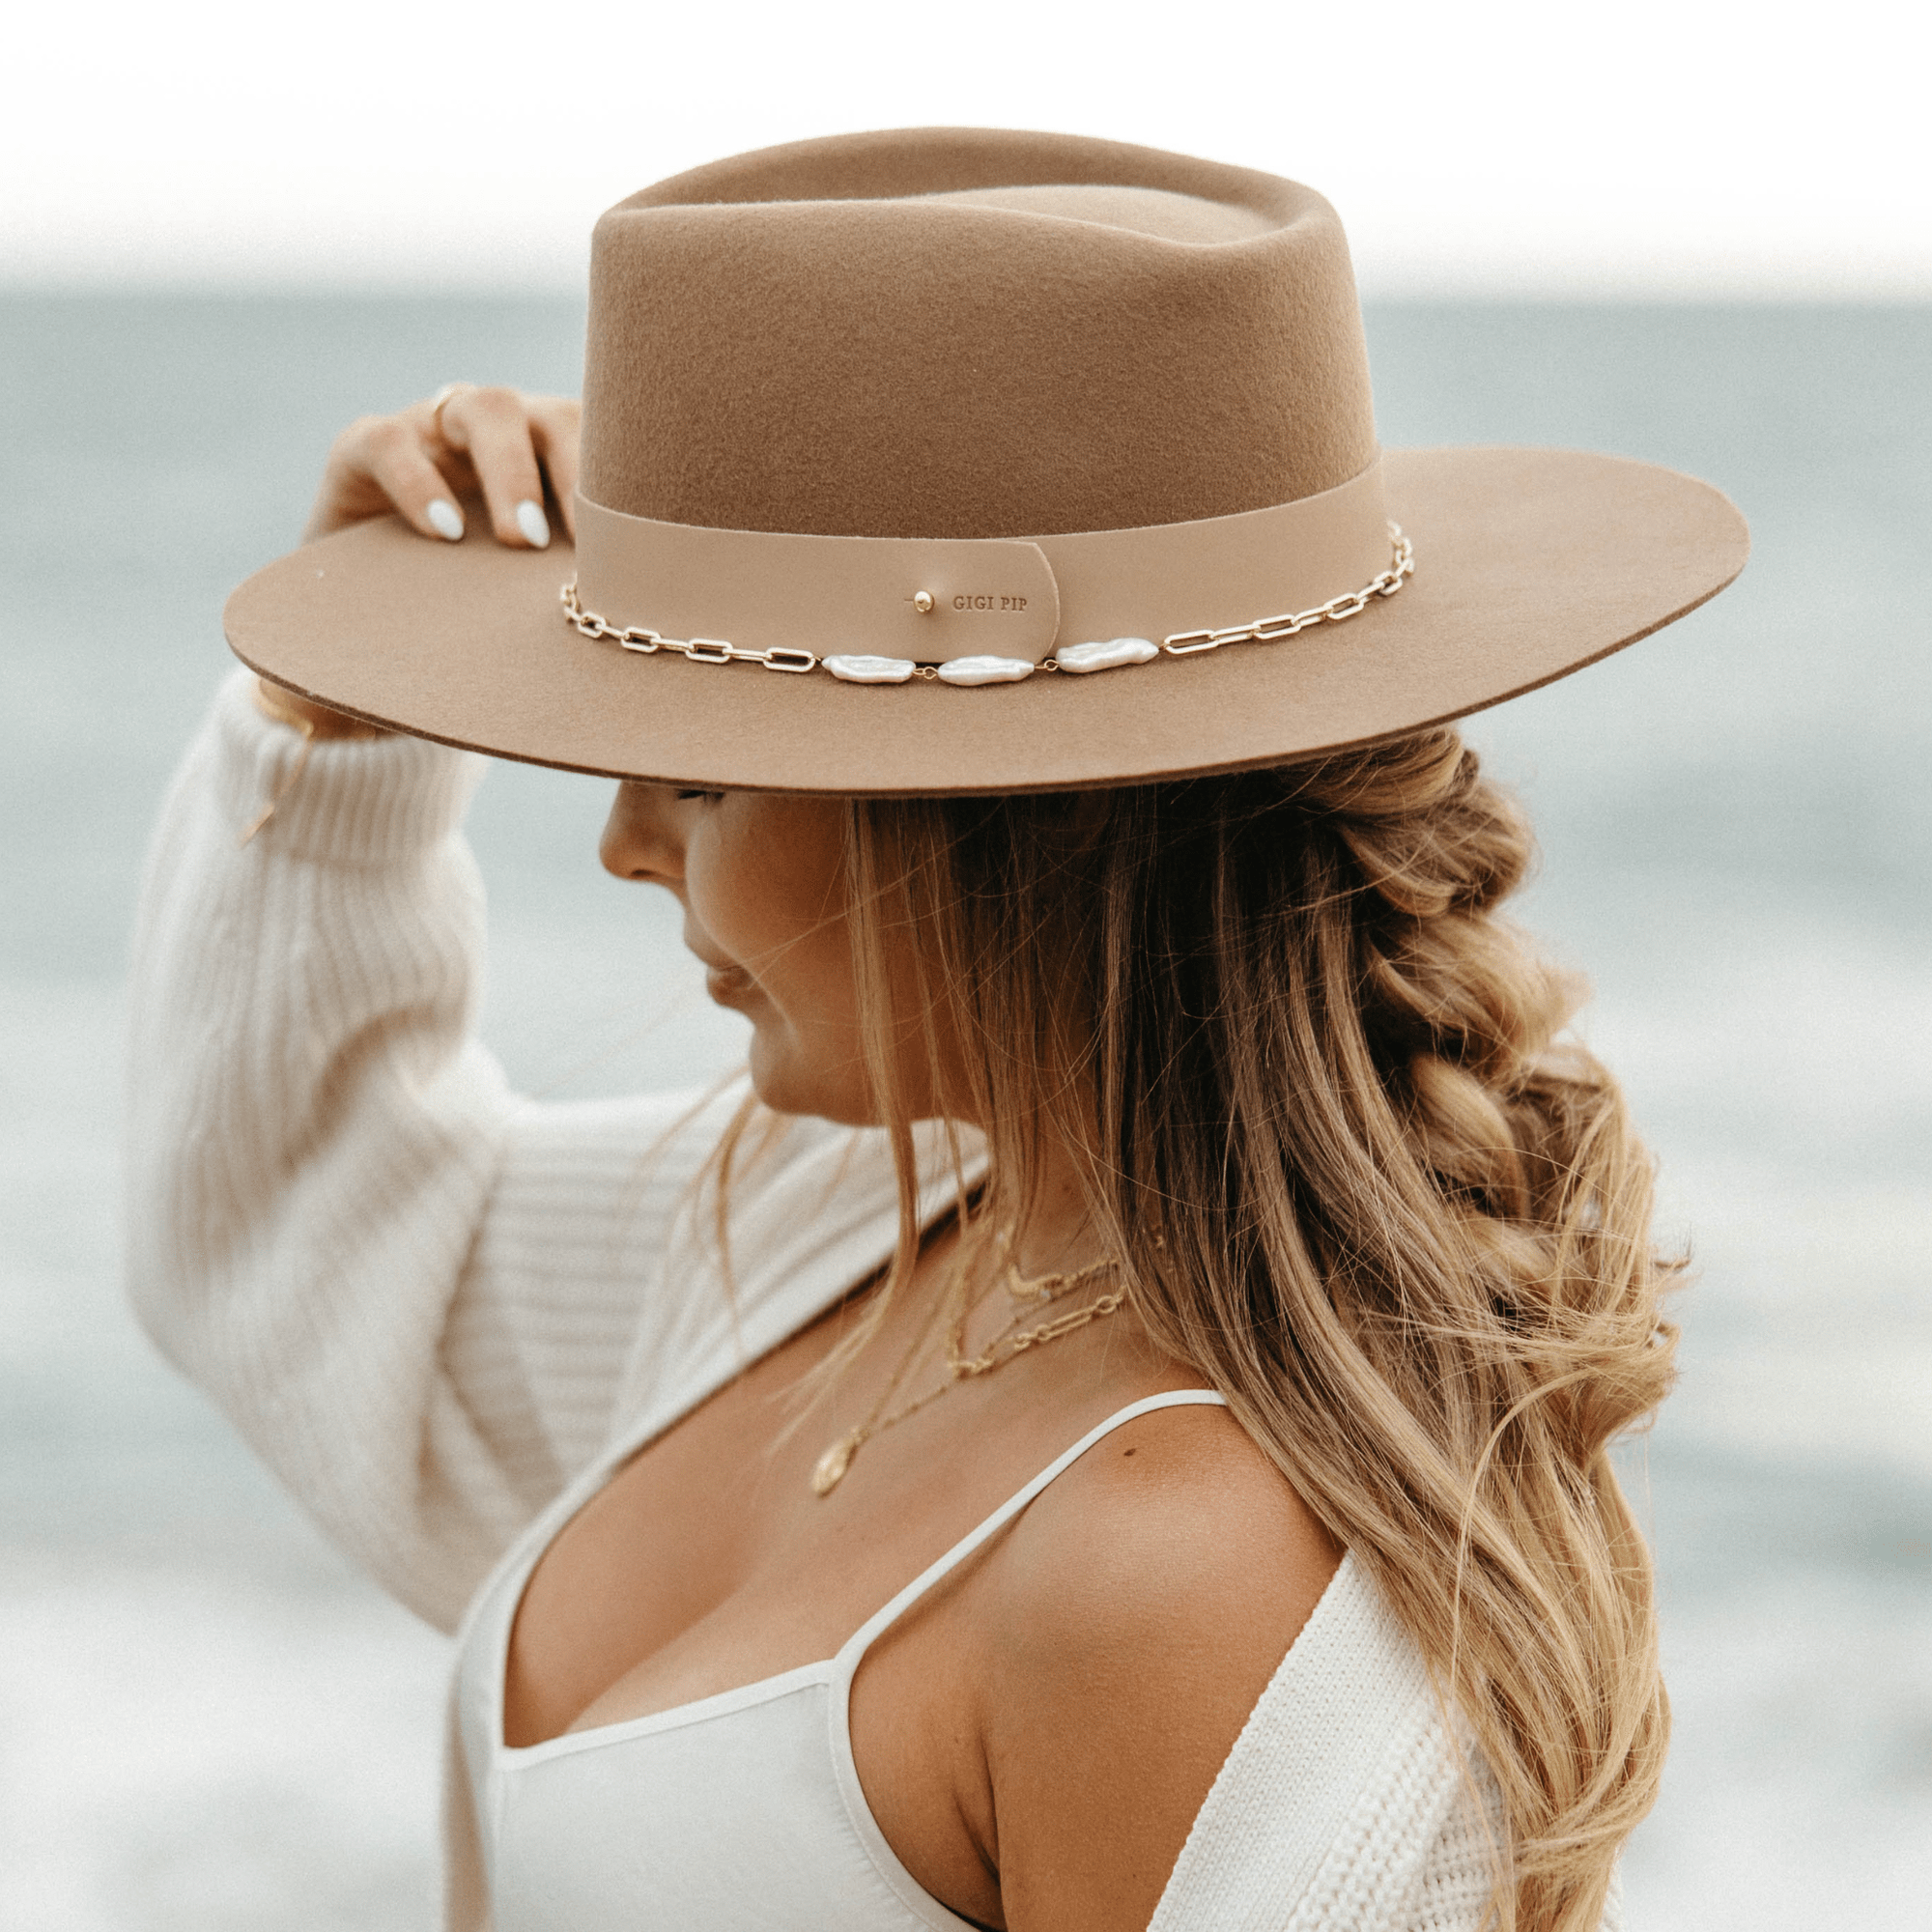 Gigi Pip limited edition hats for women - Dakota Triangle Crown Brown - stiff, flat wide brim + a triangle crown featuring a wide genuine leather hat band + a gold pearl chain hat band [brown]